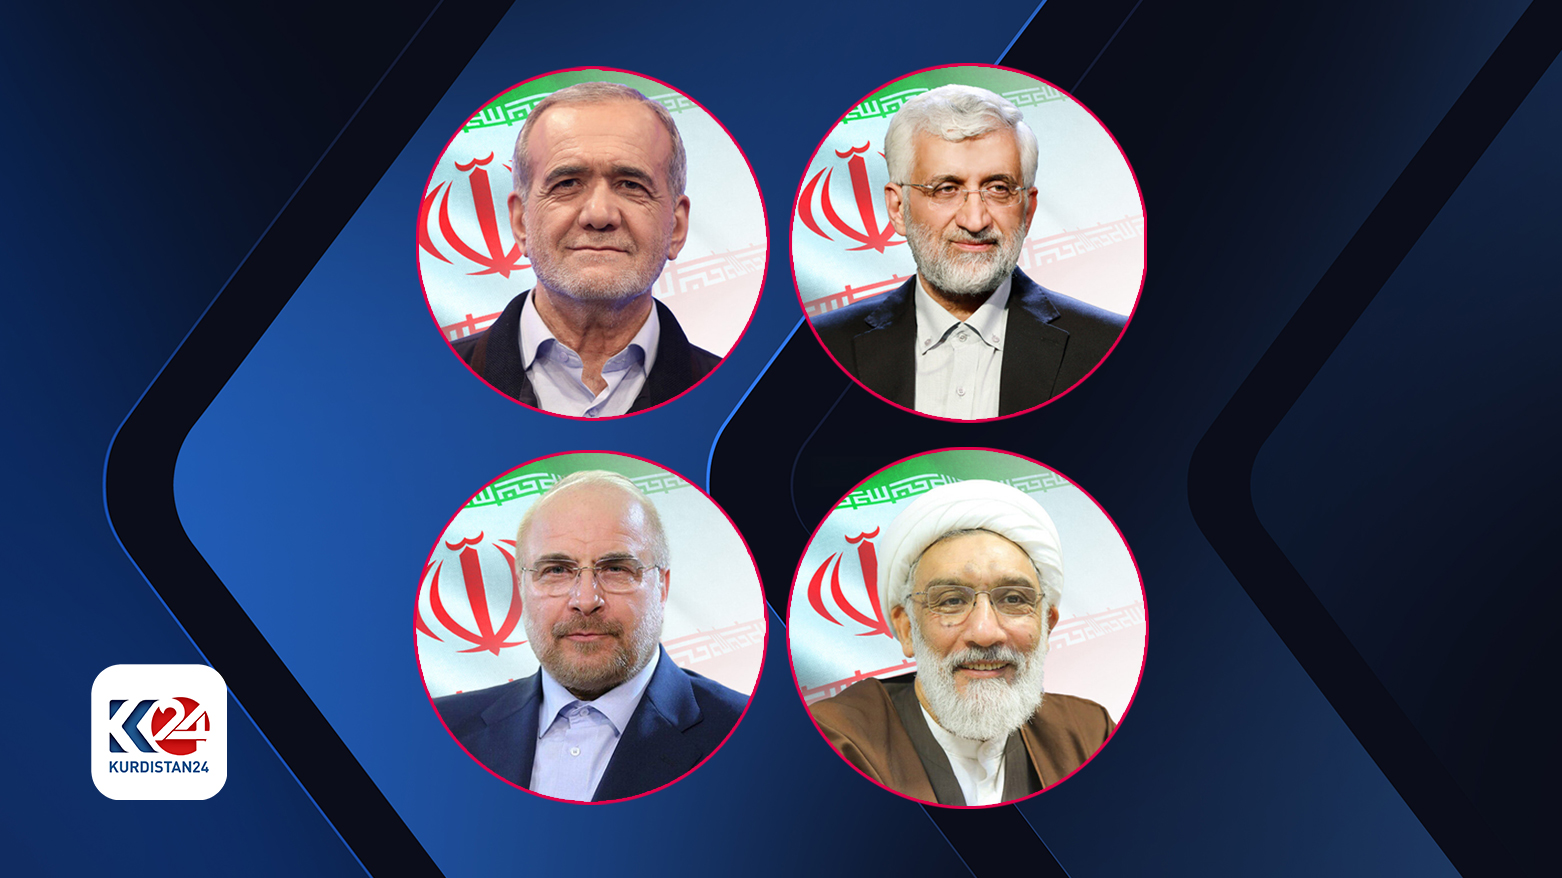 Preliminary results announced for  th presidential election in Iran